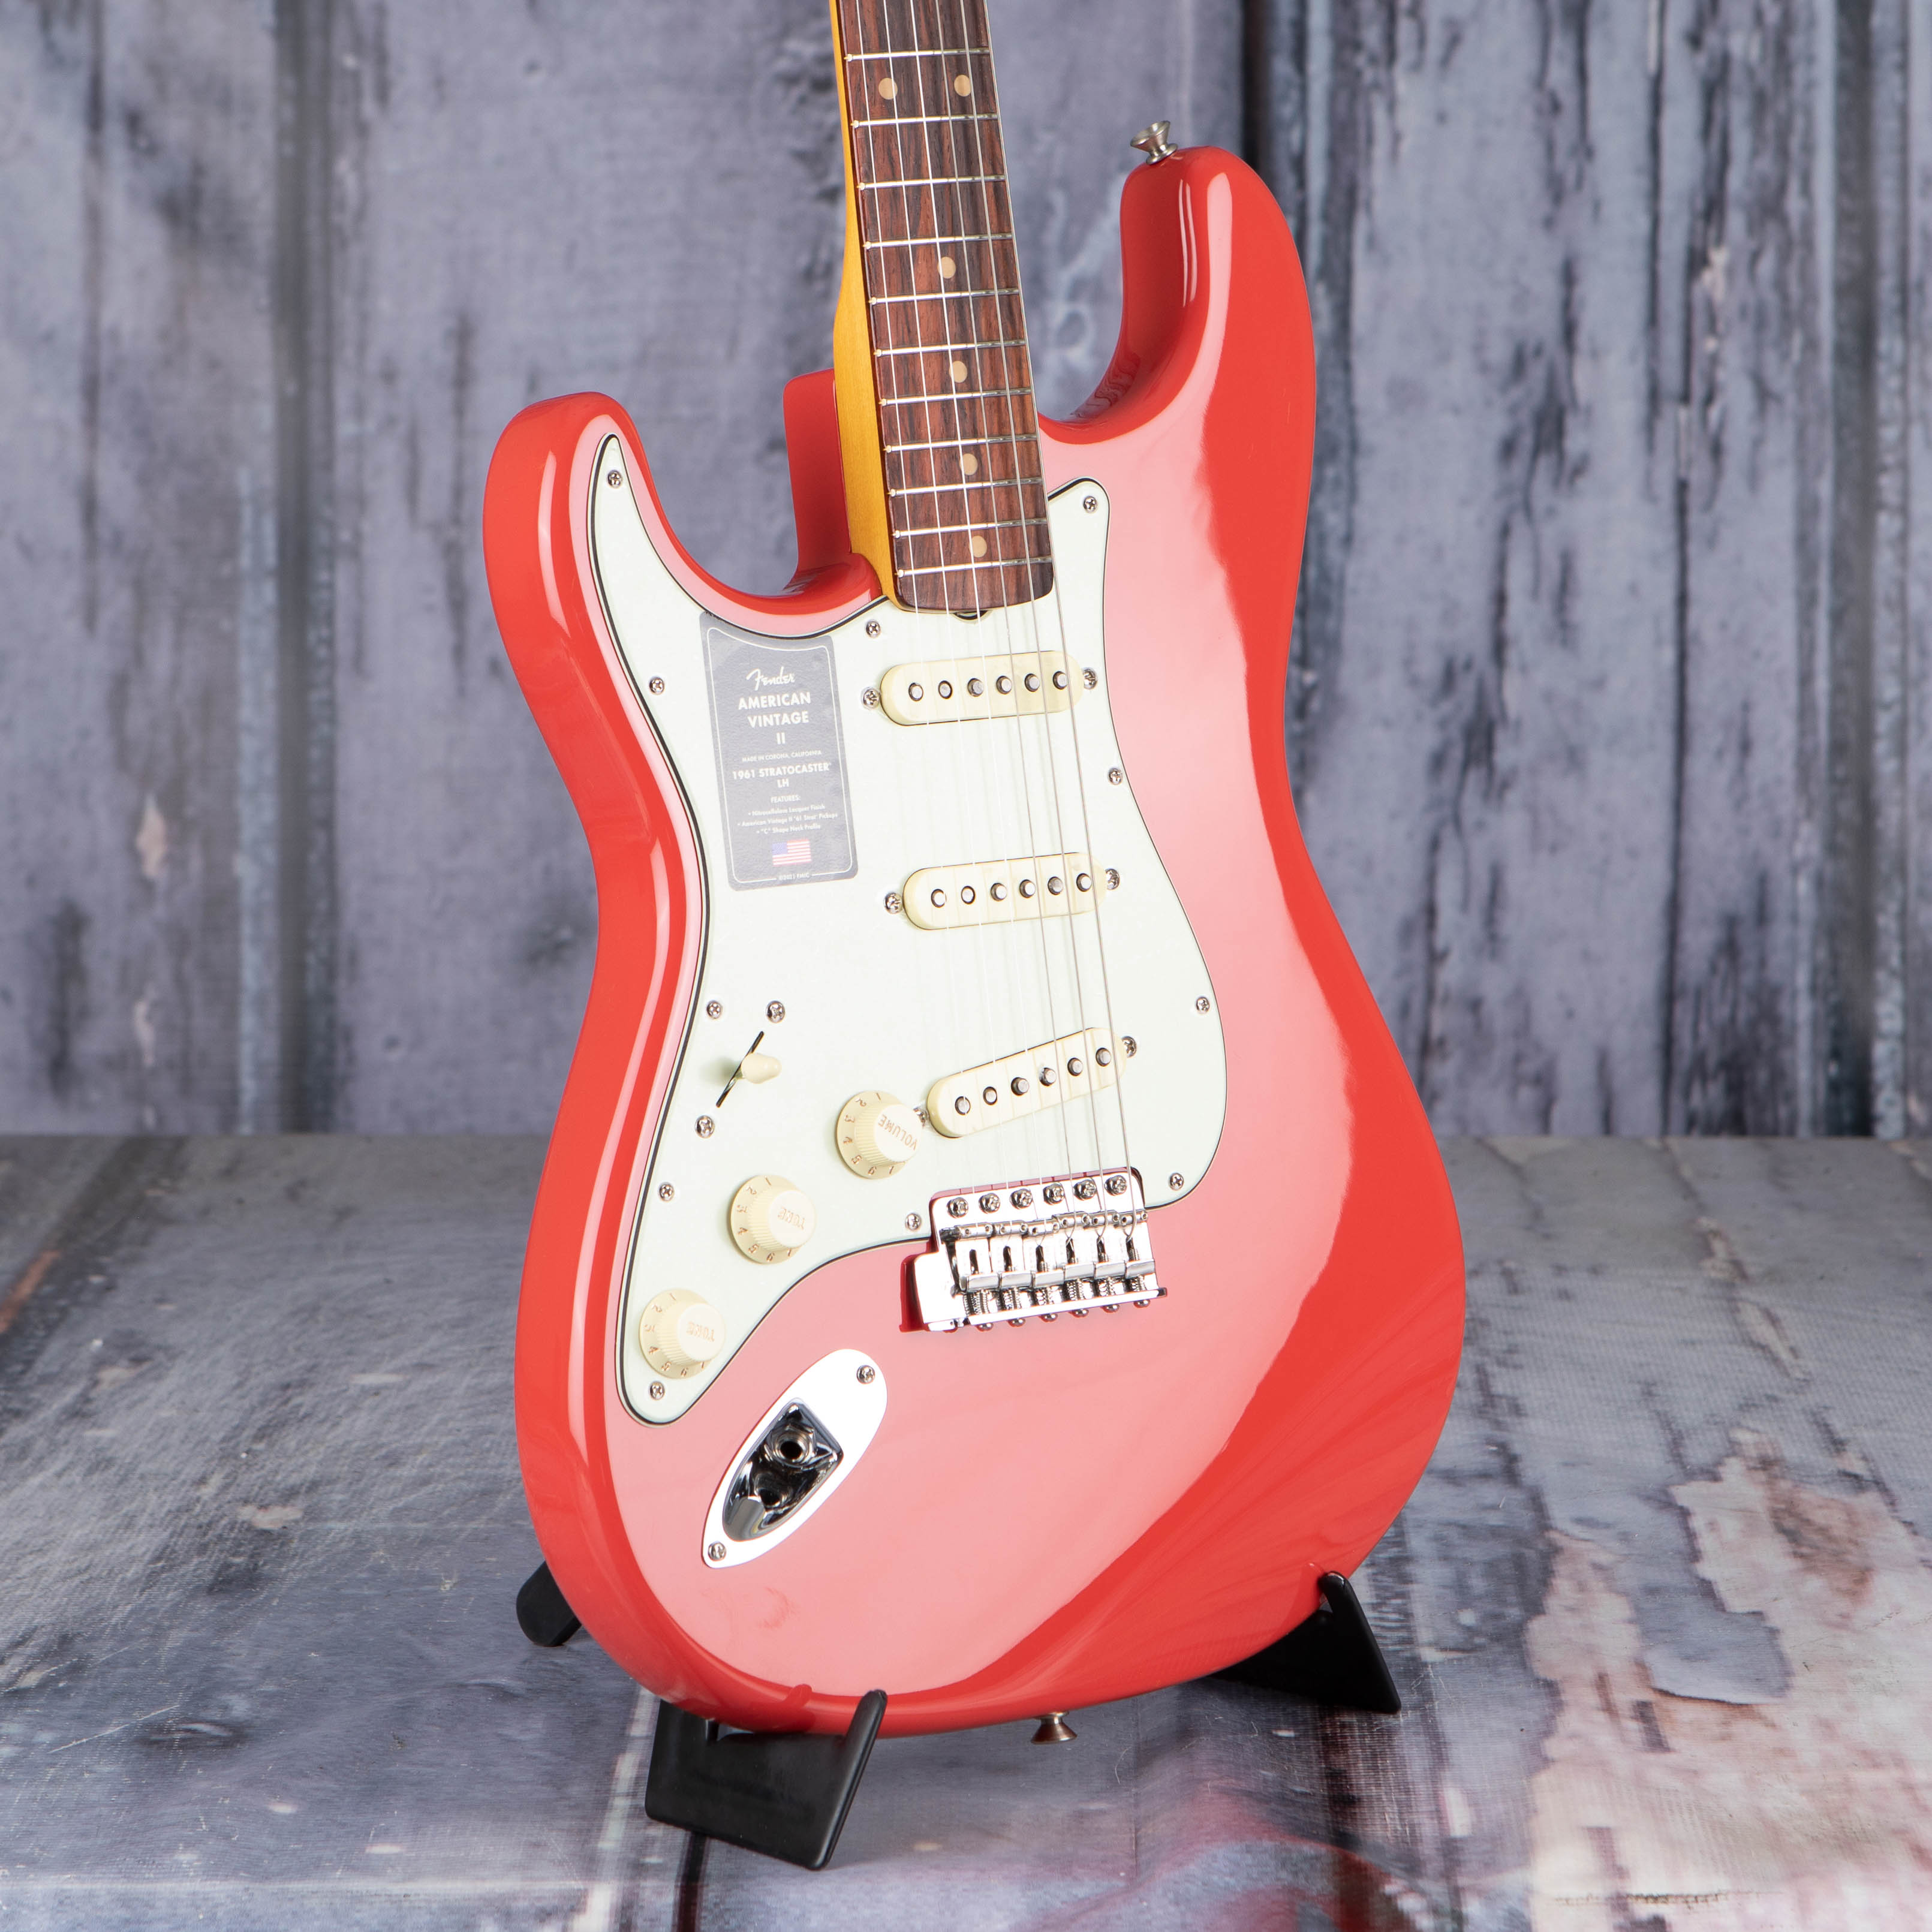 Fender American Vintage II 1961 Stratocaster Left-Handed Electric Guitar, Fiesta Red, angle